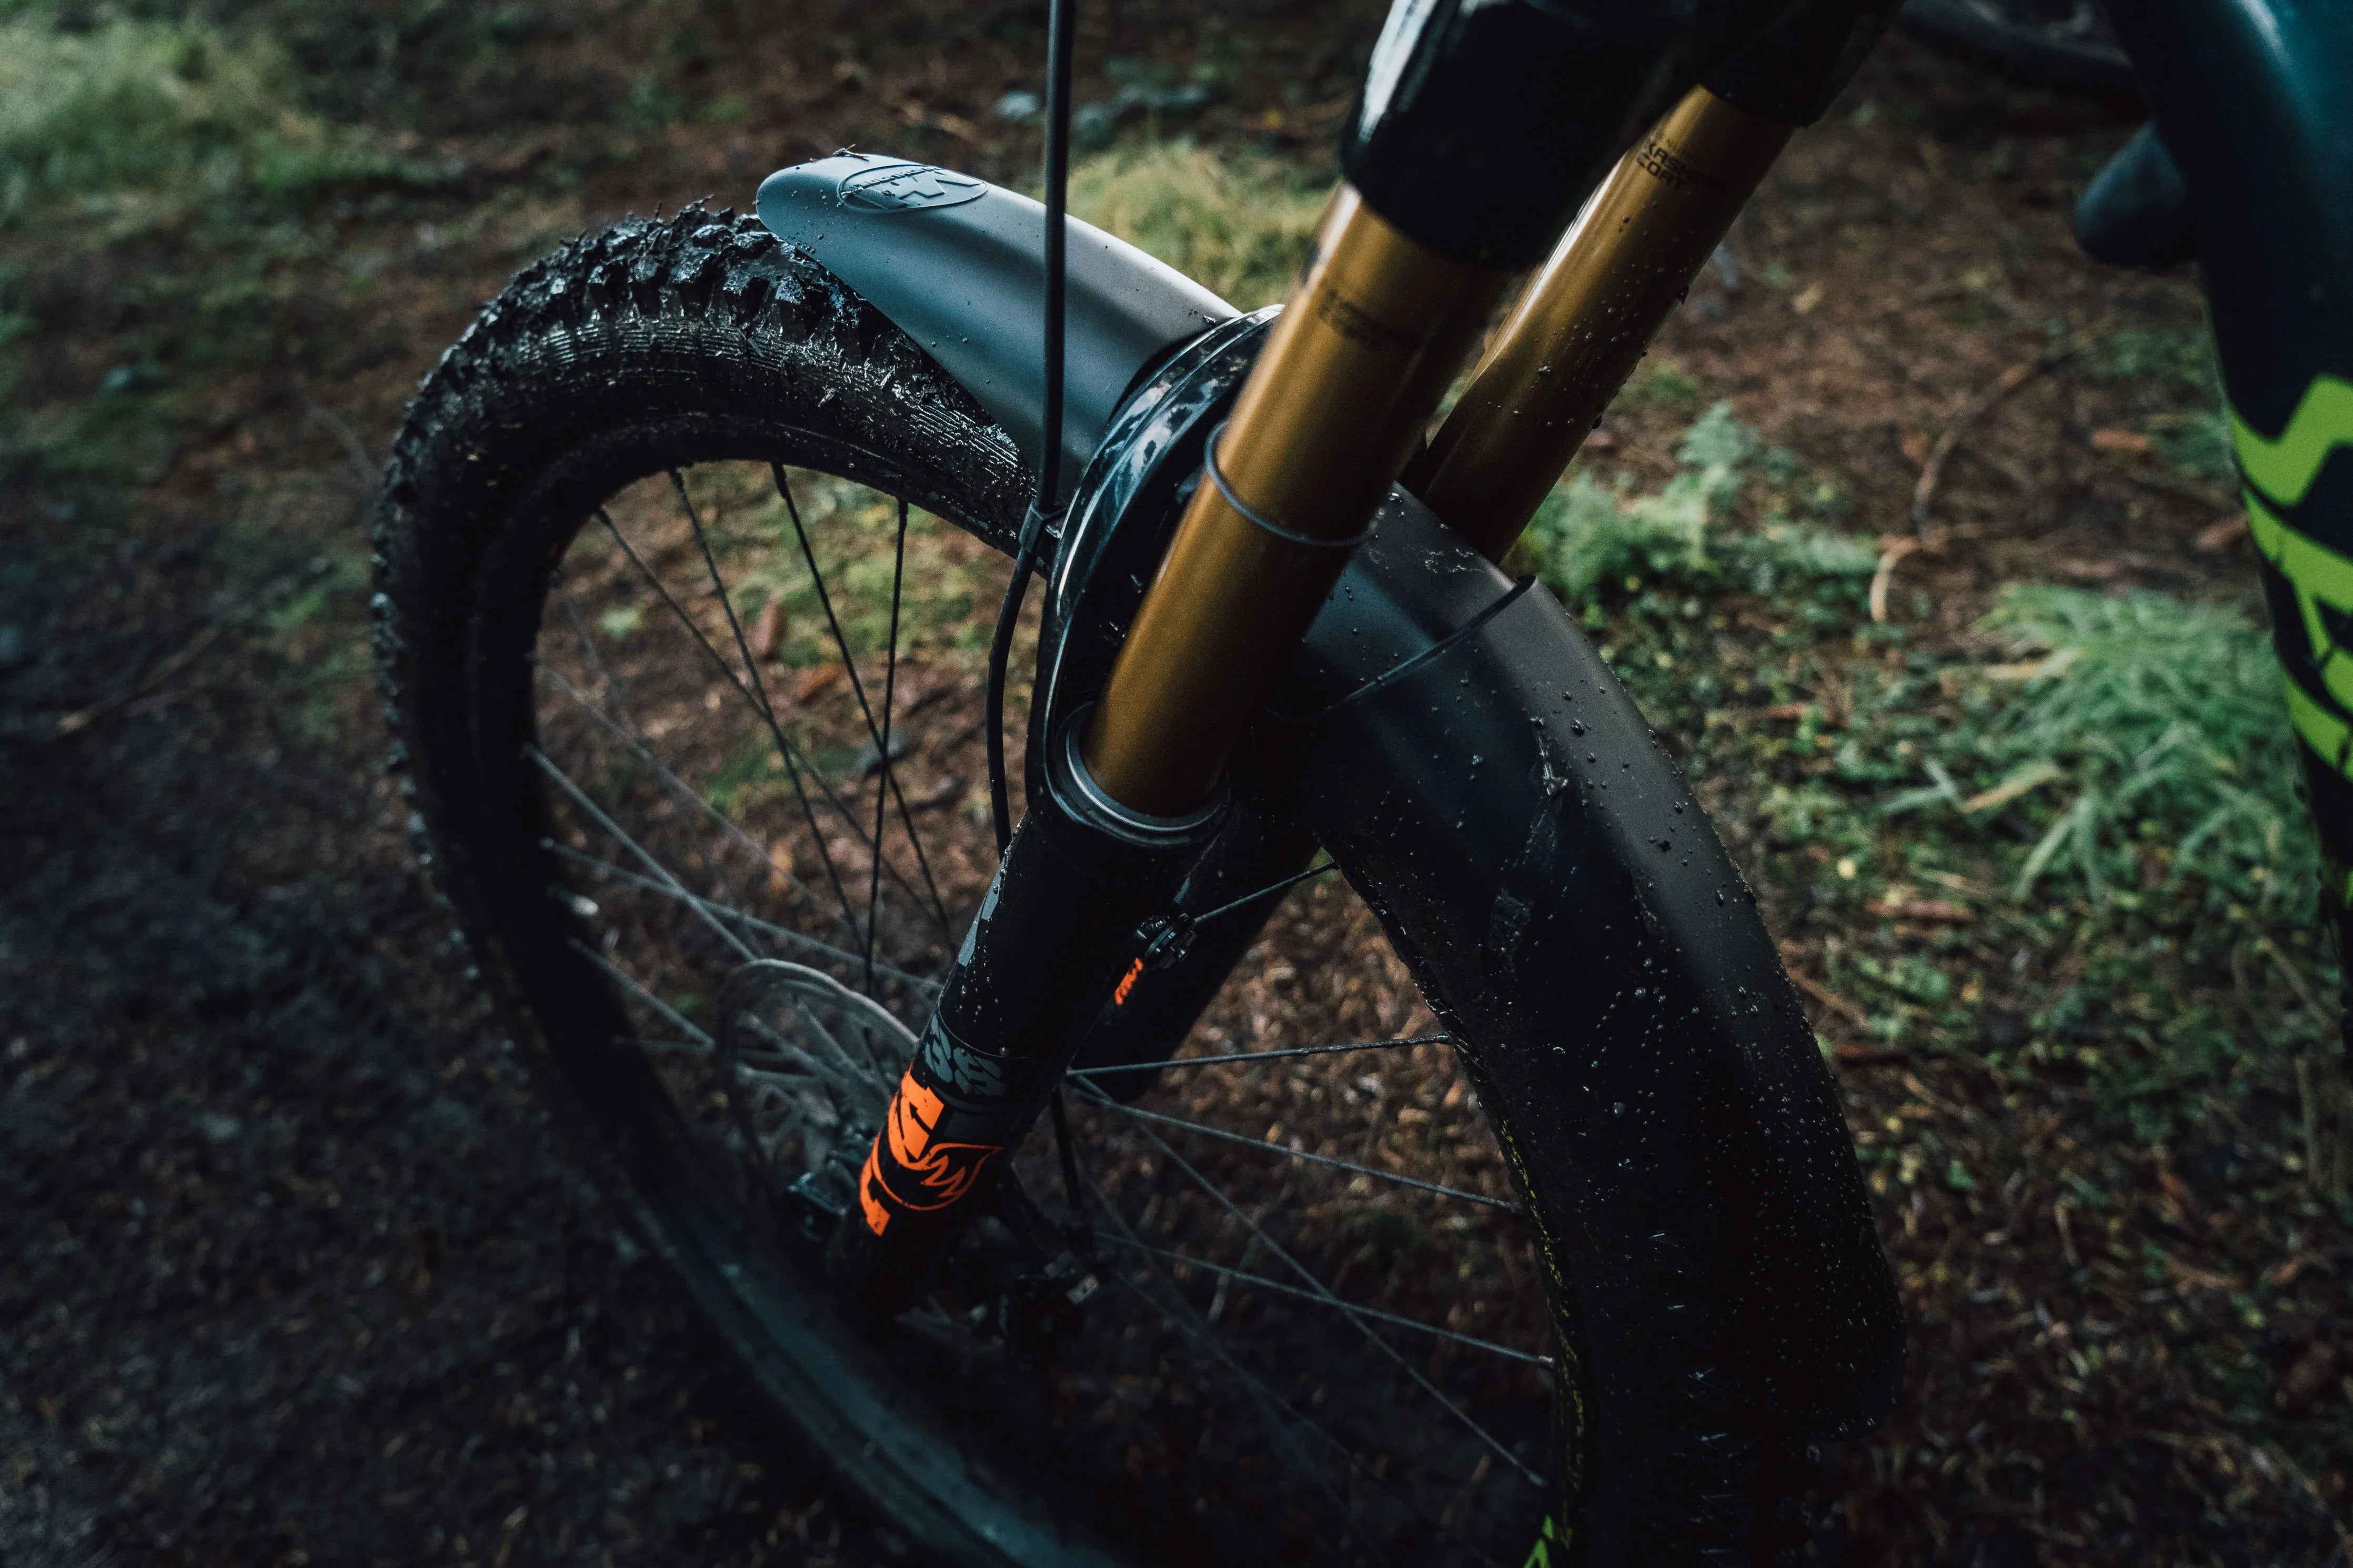 Review: The Mudhugger EVO is a monster-coverage mud guard, sustainably  produced - Bikerumor